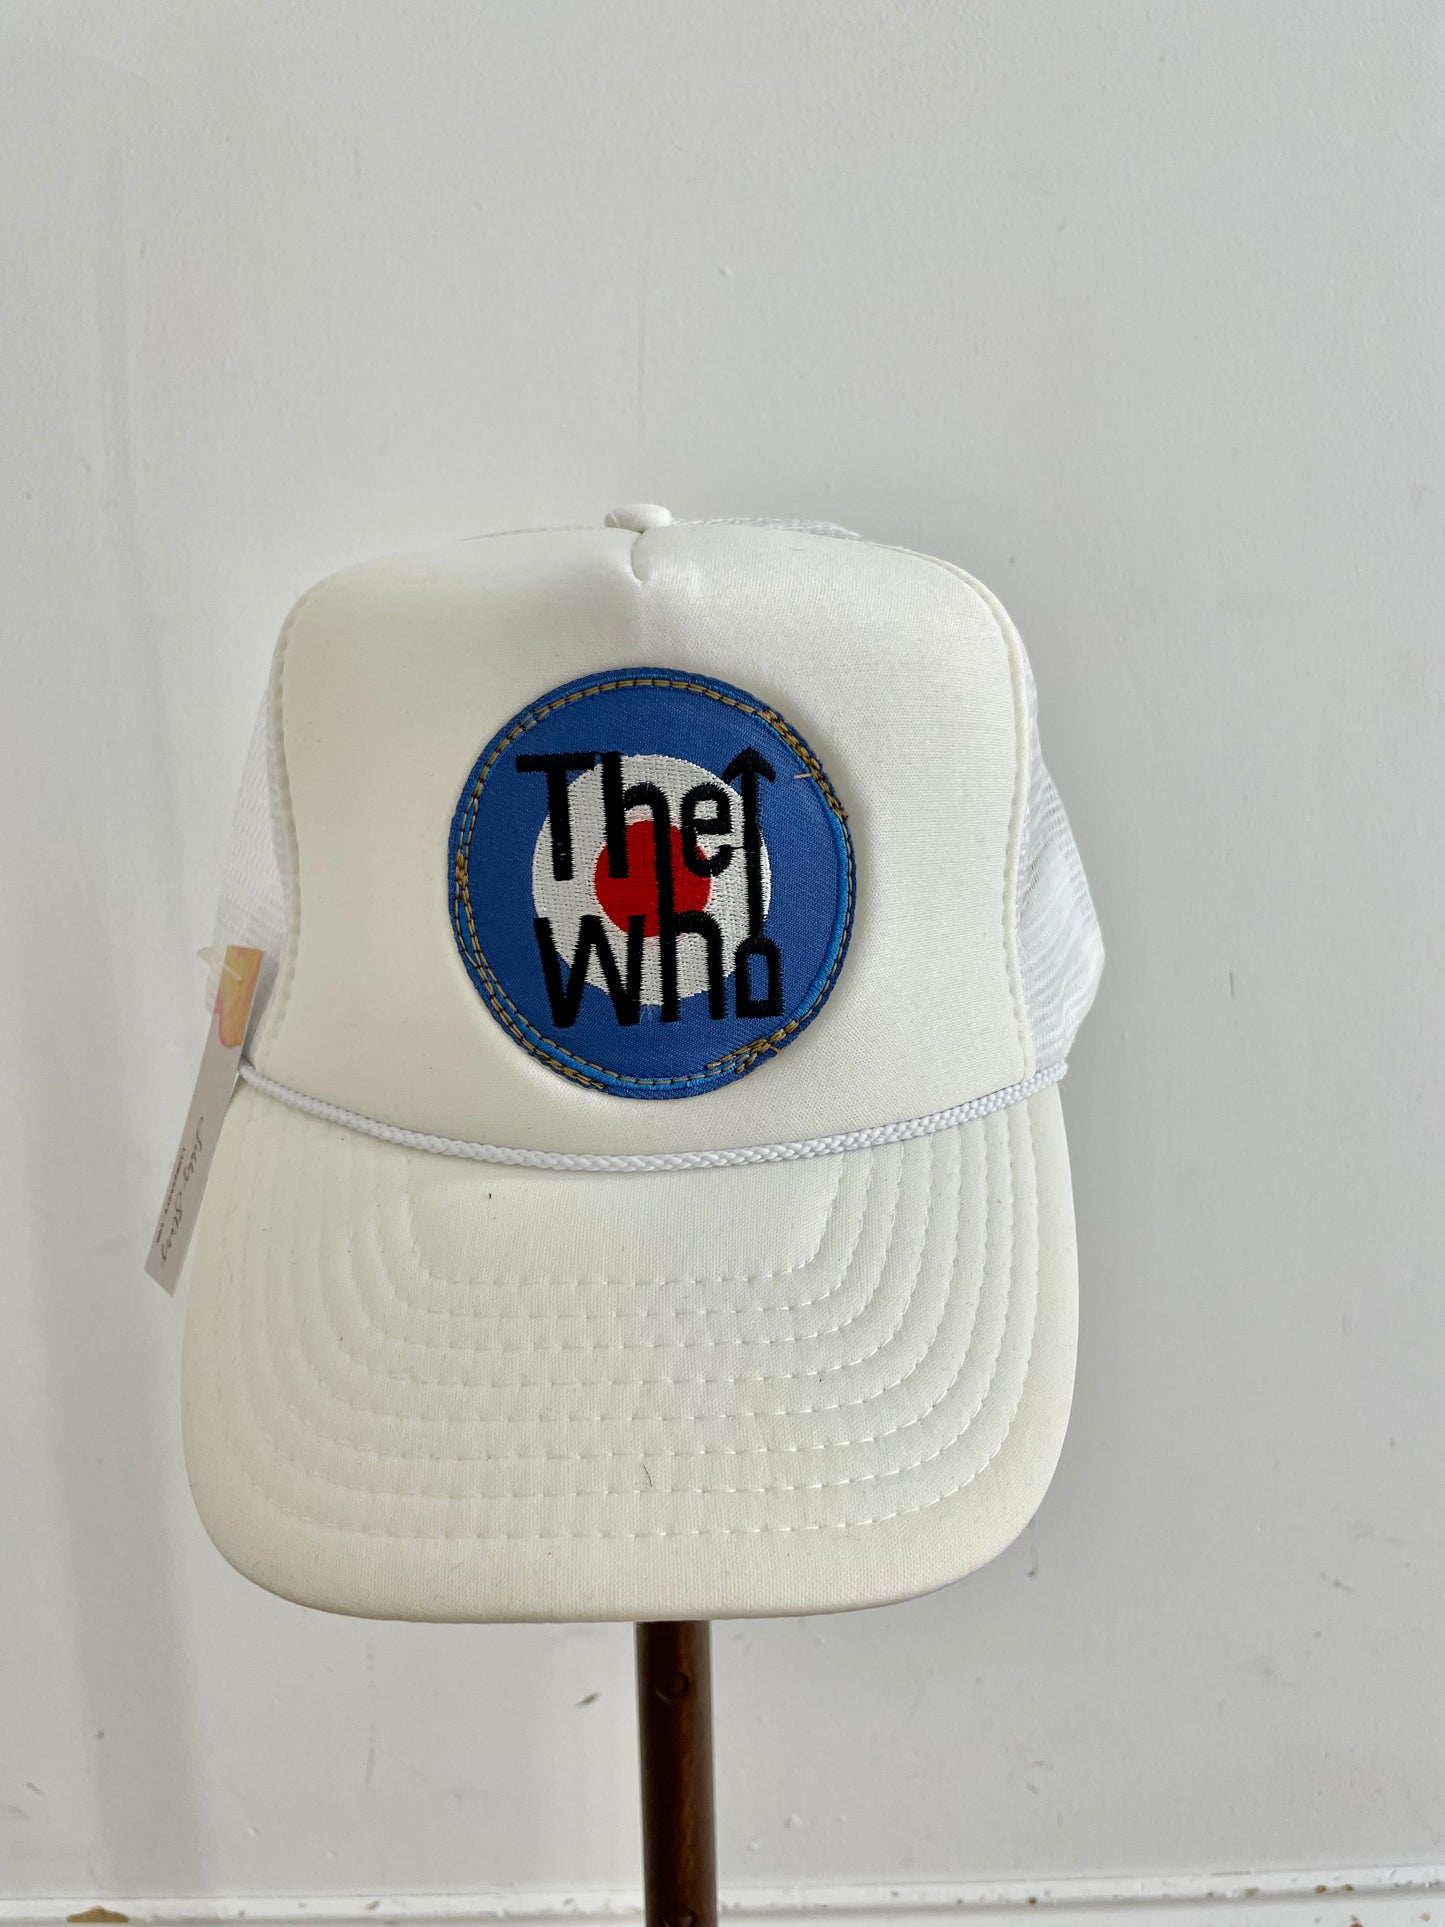 LS The Who Hat